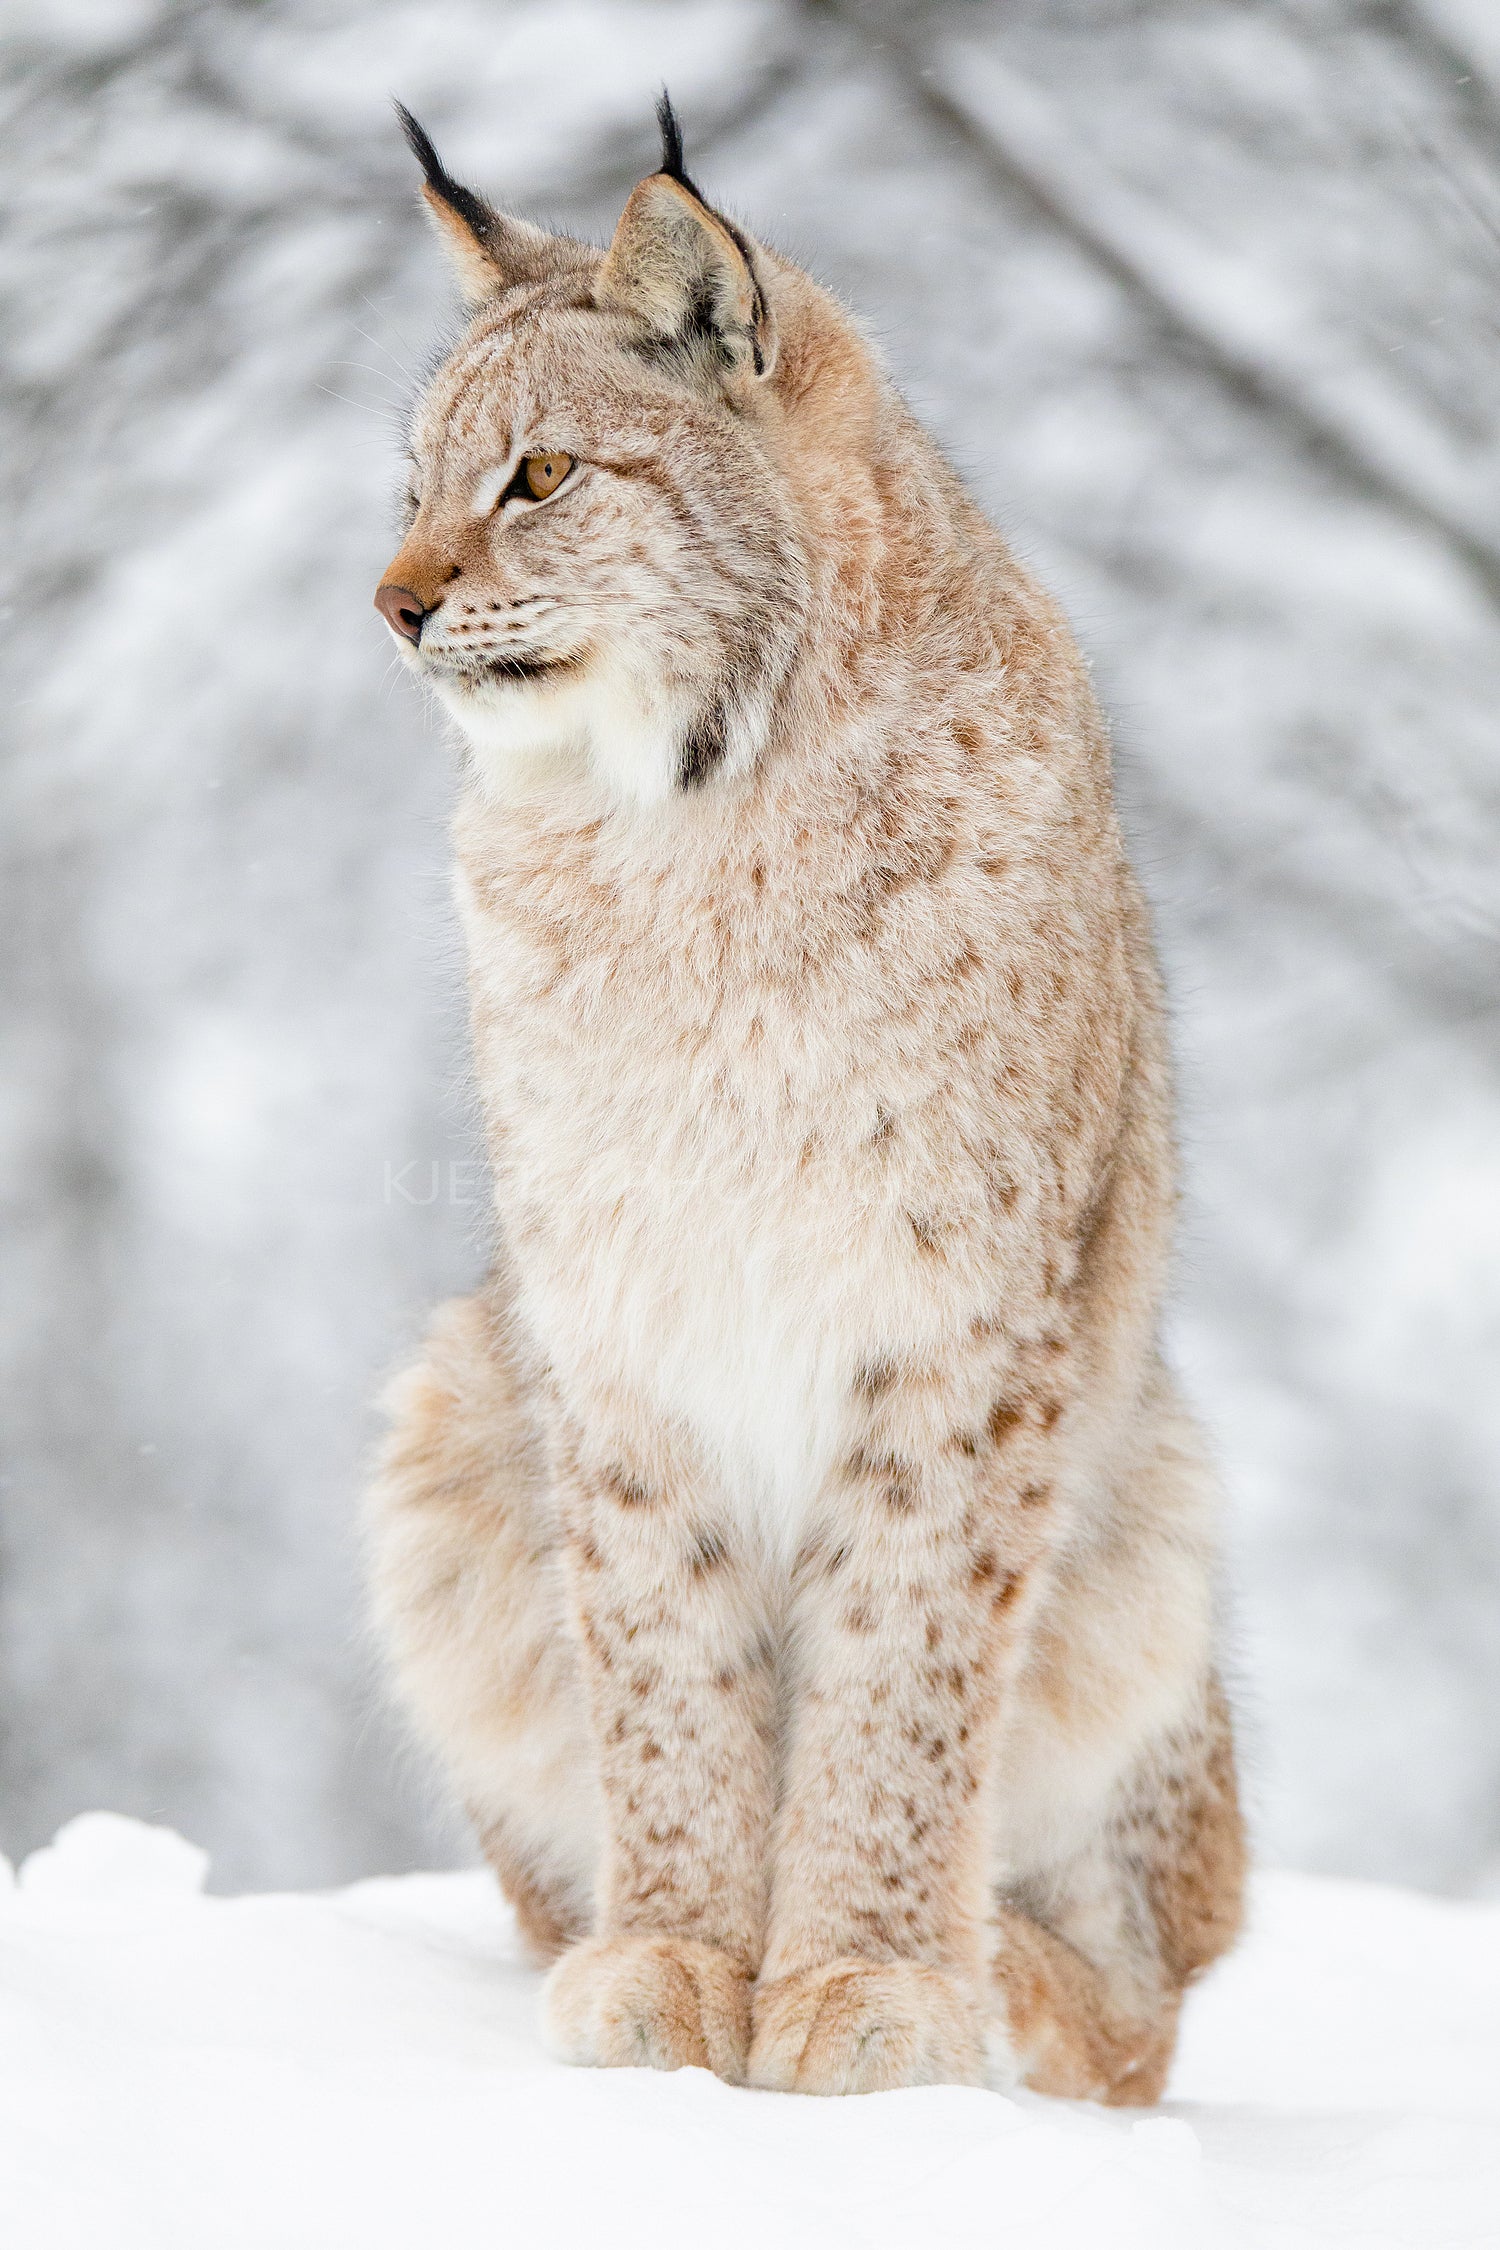 Close portrait of beautiful lynx cat in the winter snow